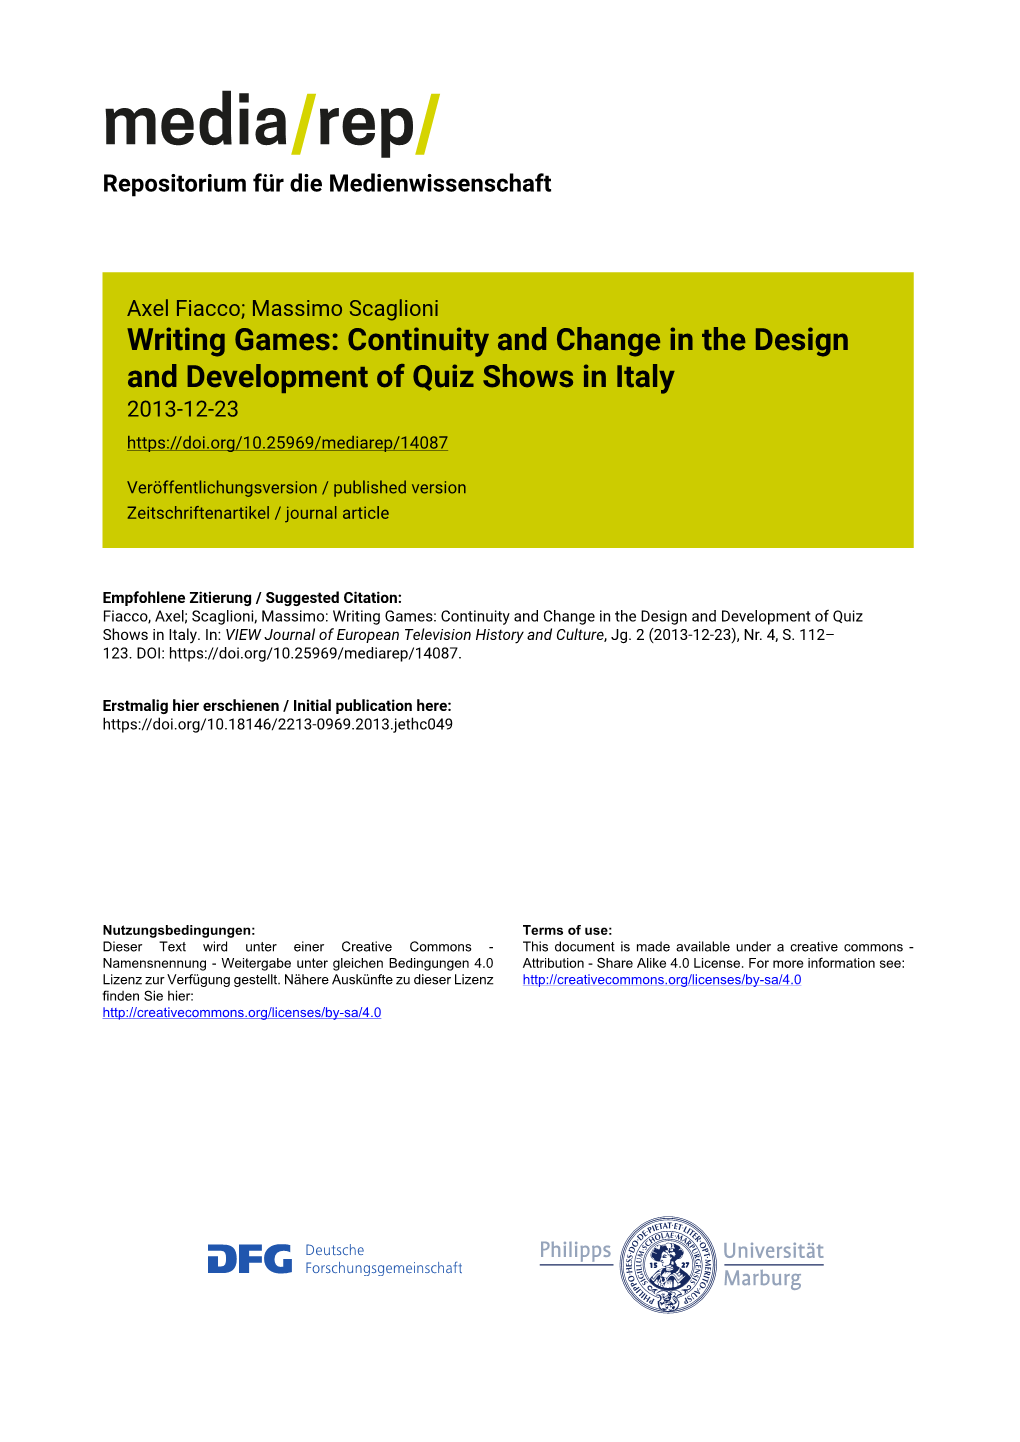 Writing Games: Continuity and Change in the Design and Development of Quiz Shows in Italy 2013-12-23